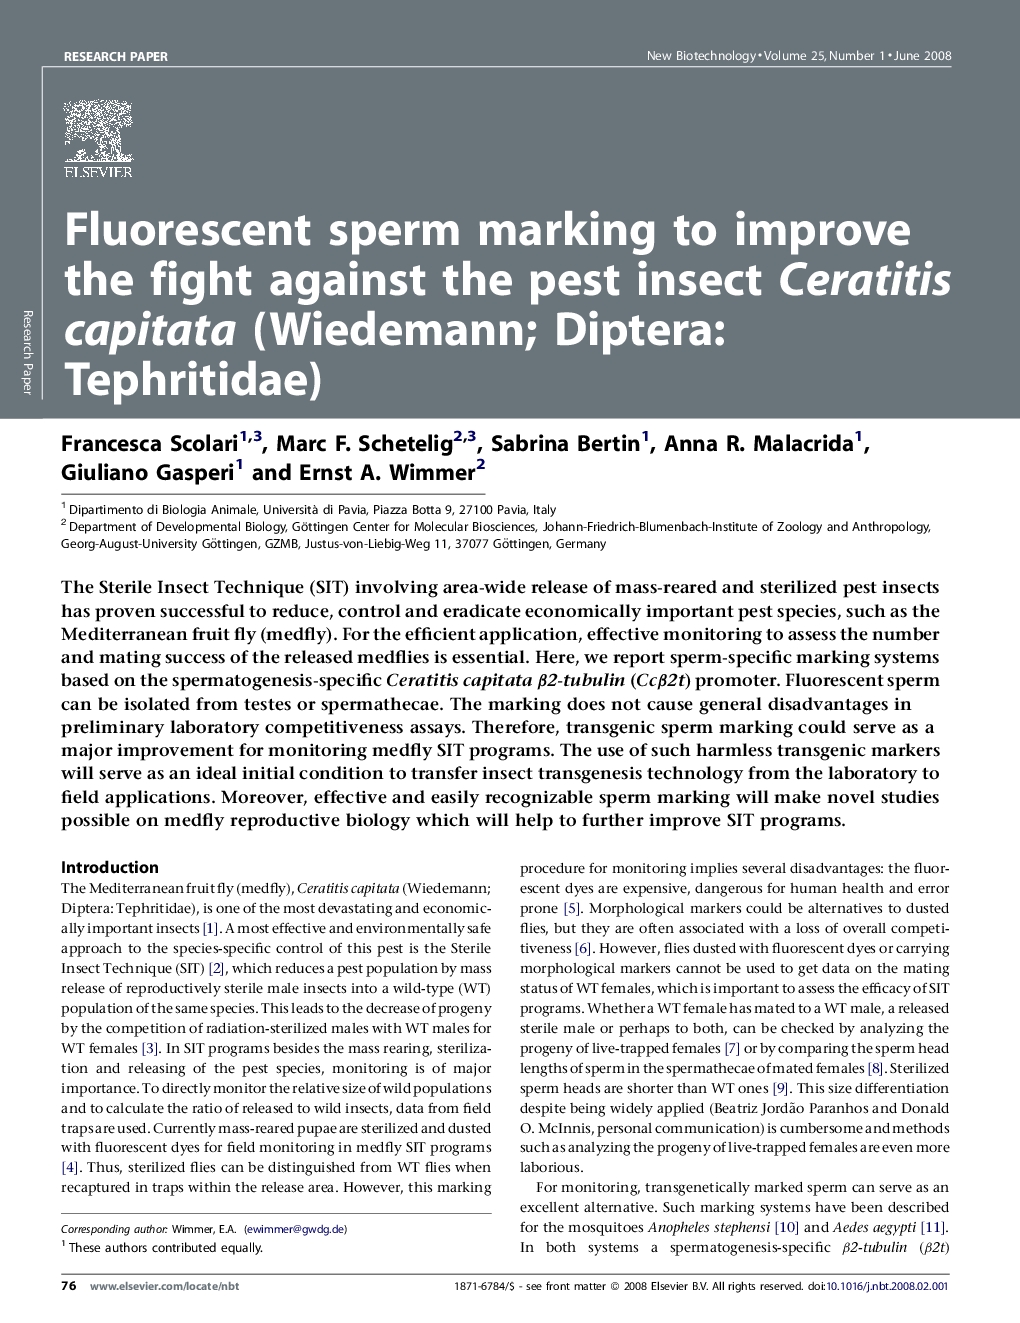 Fluorescent sperm marking to improve the fight against the pest insect Ceratitis capitata (Wiedemann; Diptera: Tephritidae)